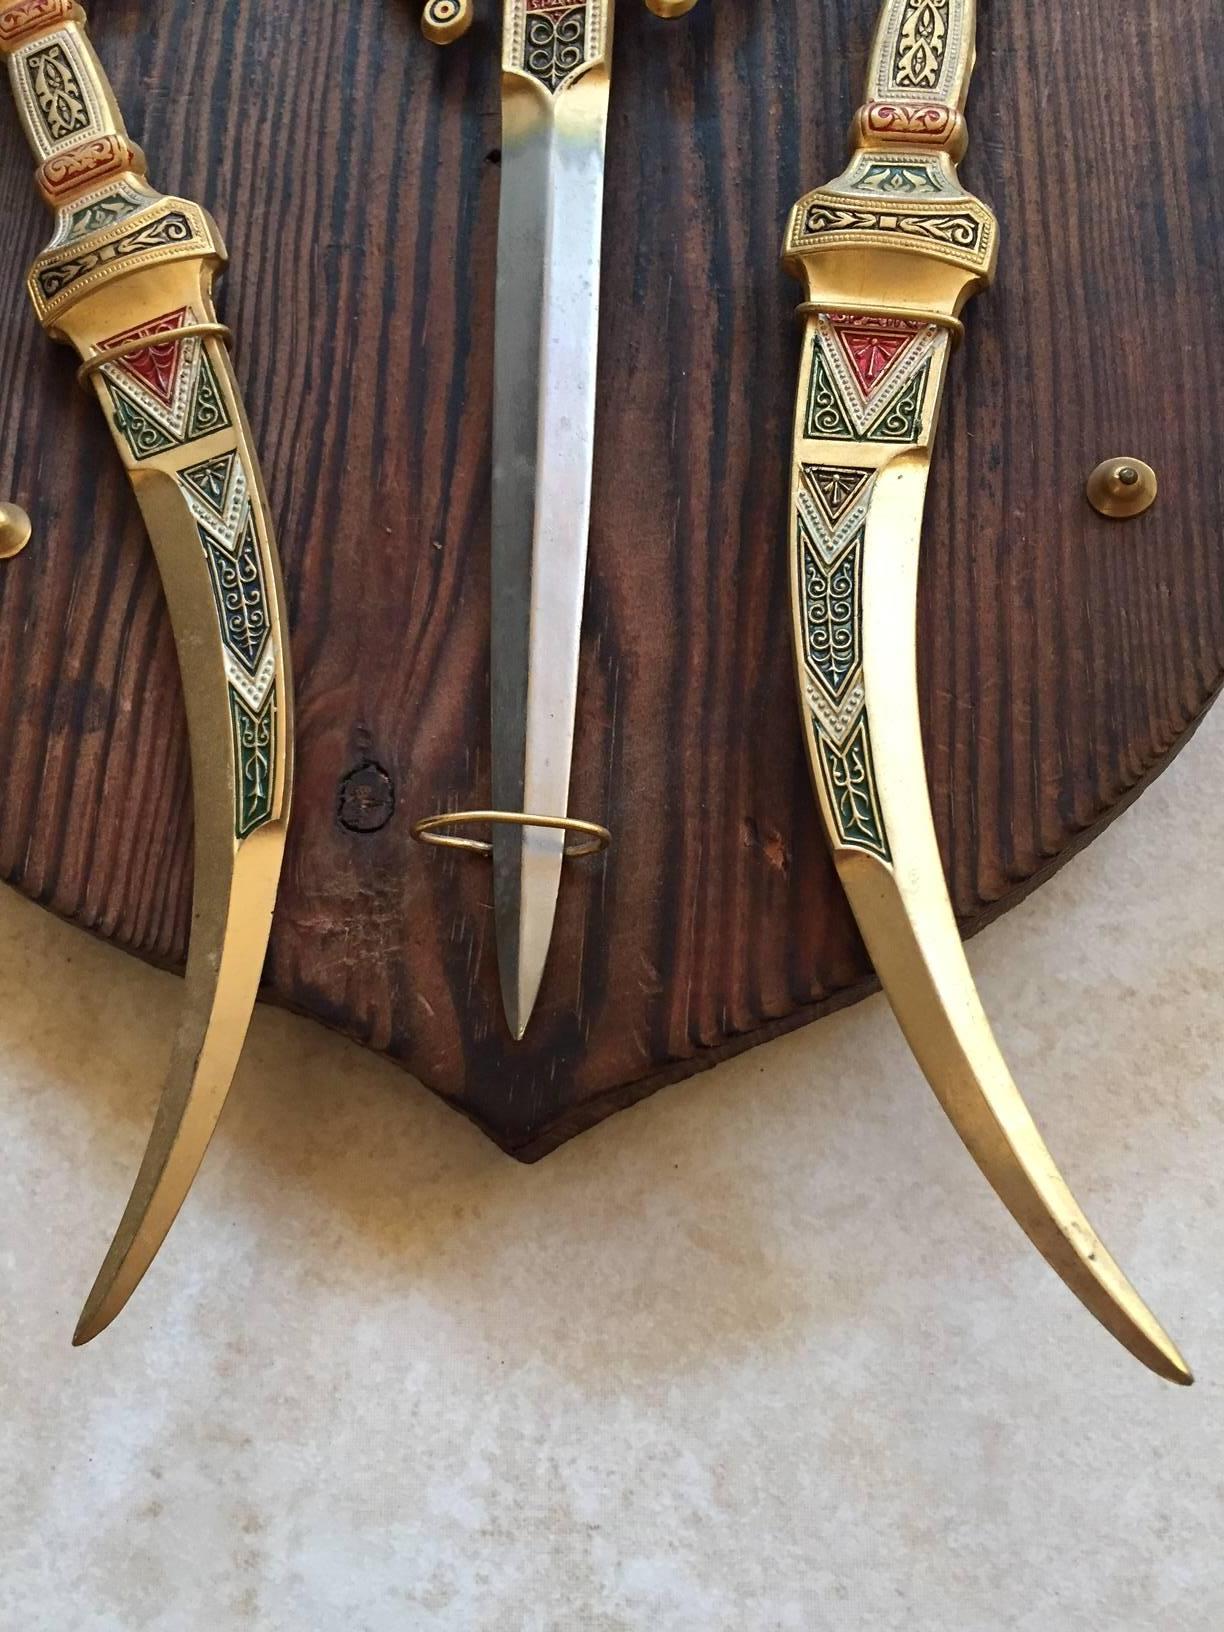 A beautiful set of three letter openers mounted on a carved wooden plaque, with
hand-painted decoration and gold gilt. Perfect for the office, cave or bar. 
In excellent condition.